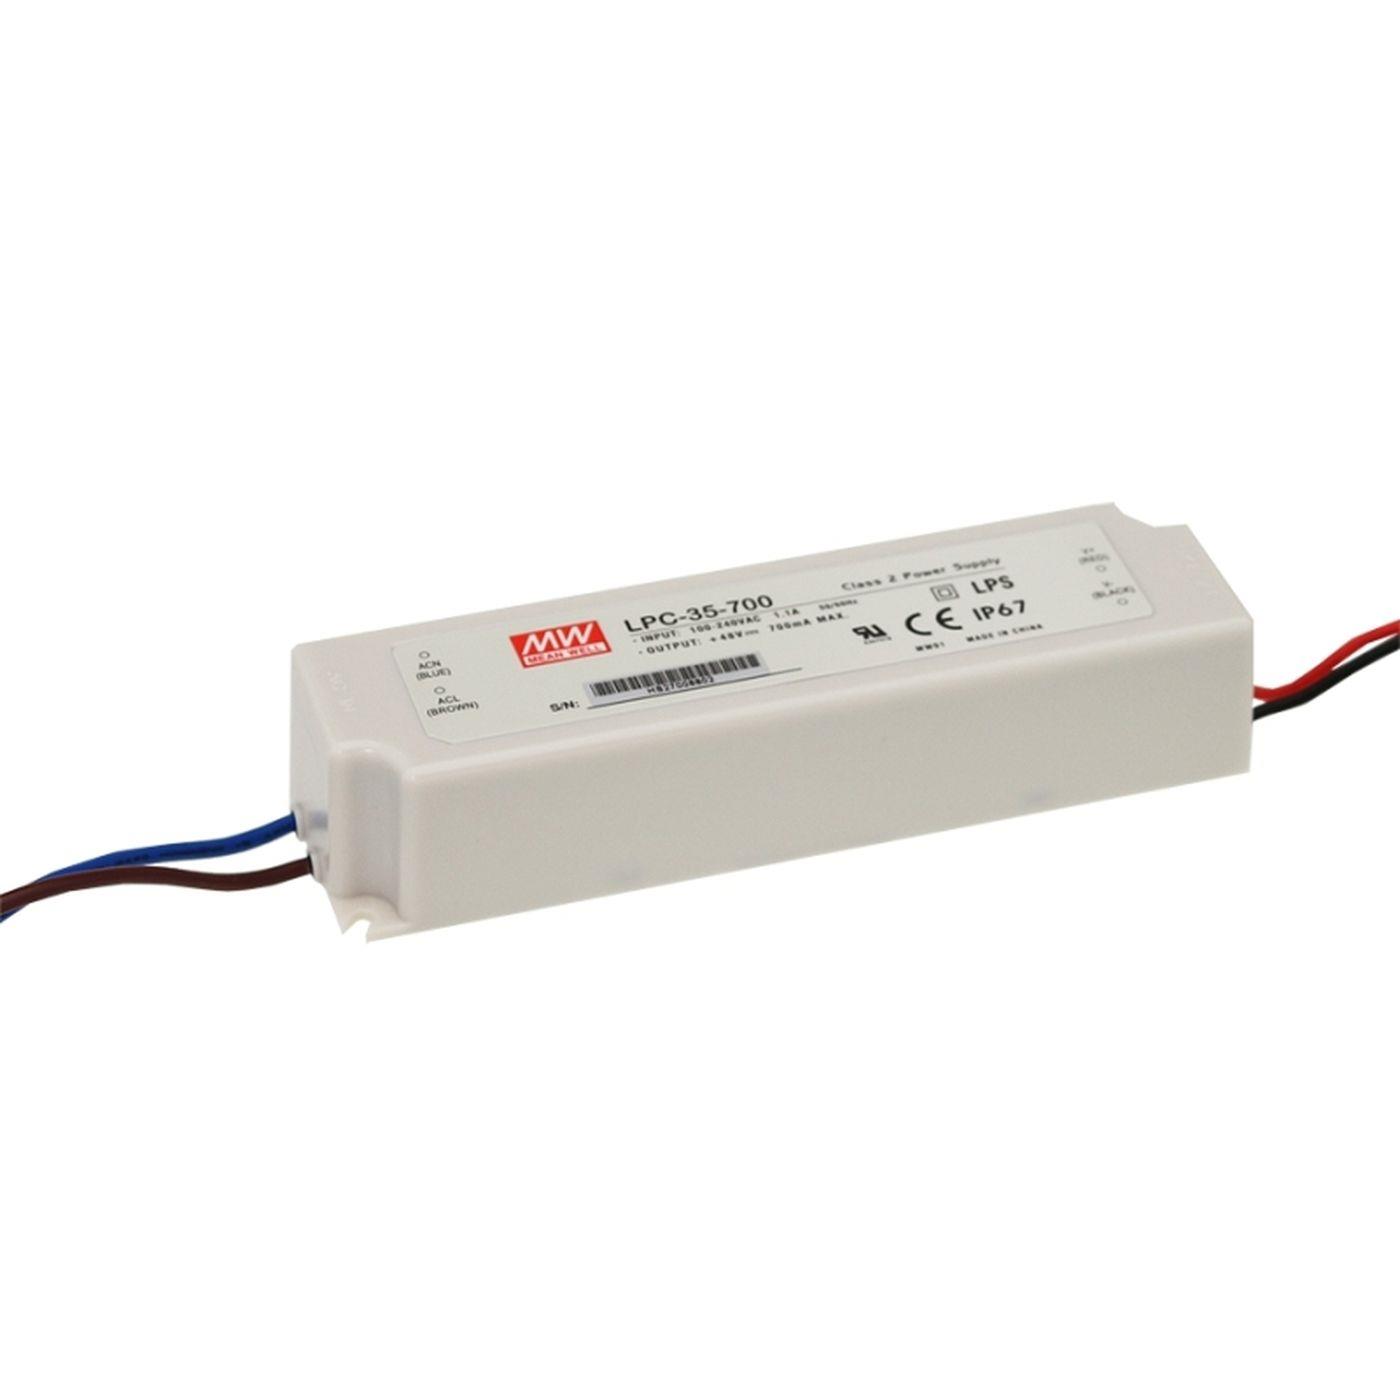 LPC-35-700 34W 700mA 9...48VDC Constant current LED power supply Driver Transformer IP67